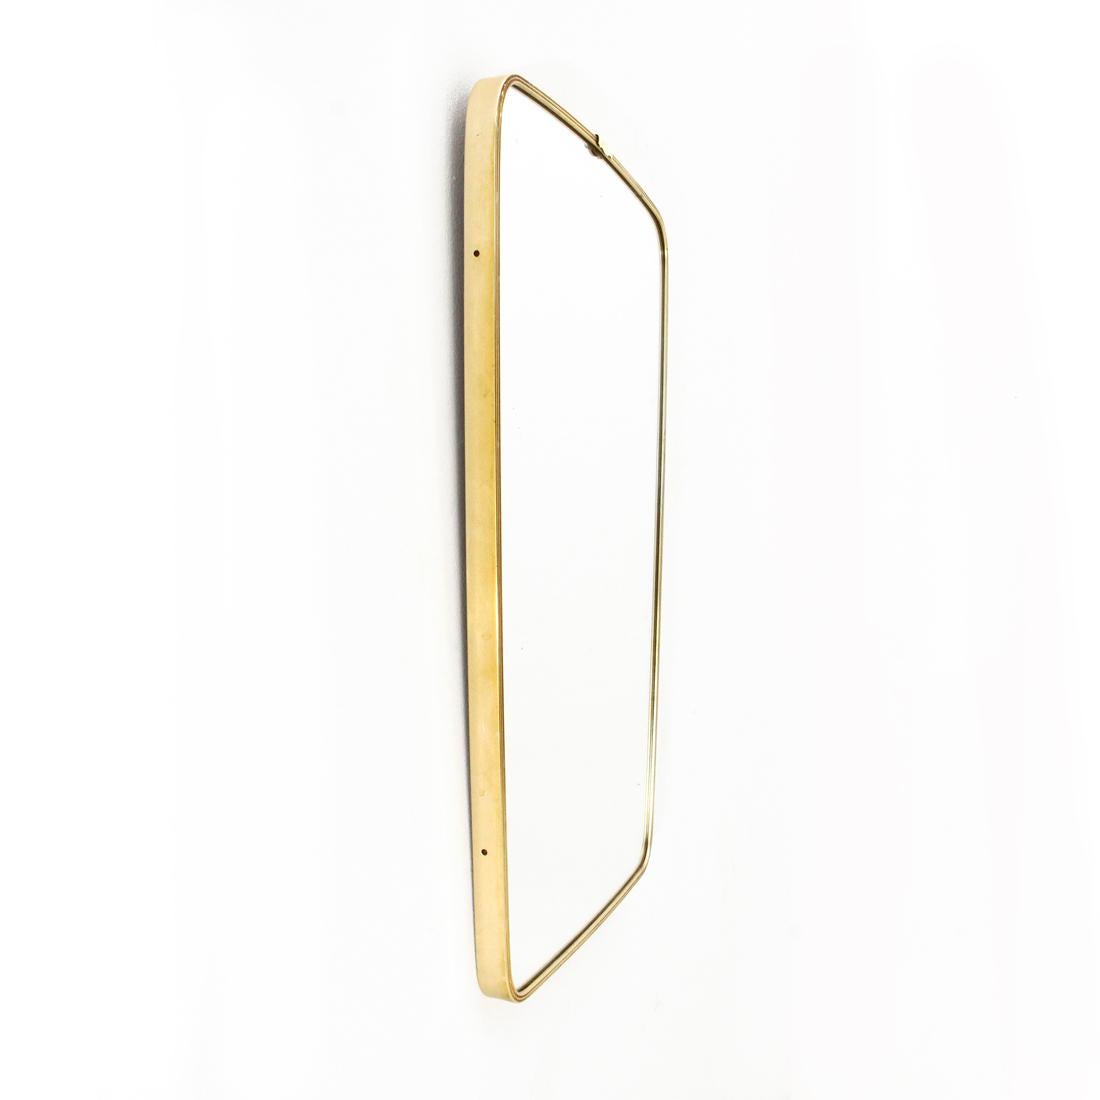 Italian manufacture mirror produced in the 1950s.
Wooden structure.
Brass frame with grooved front edge.
Mirrored glass.
Good general condition, some signs of normal use over time, glass with some stains.

Dimensions: Length 51.5 cm - Depth